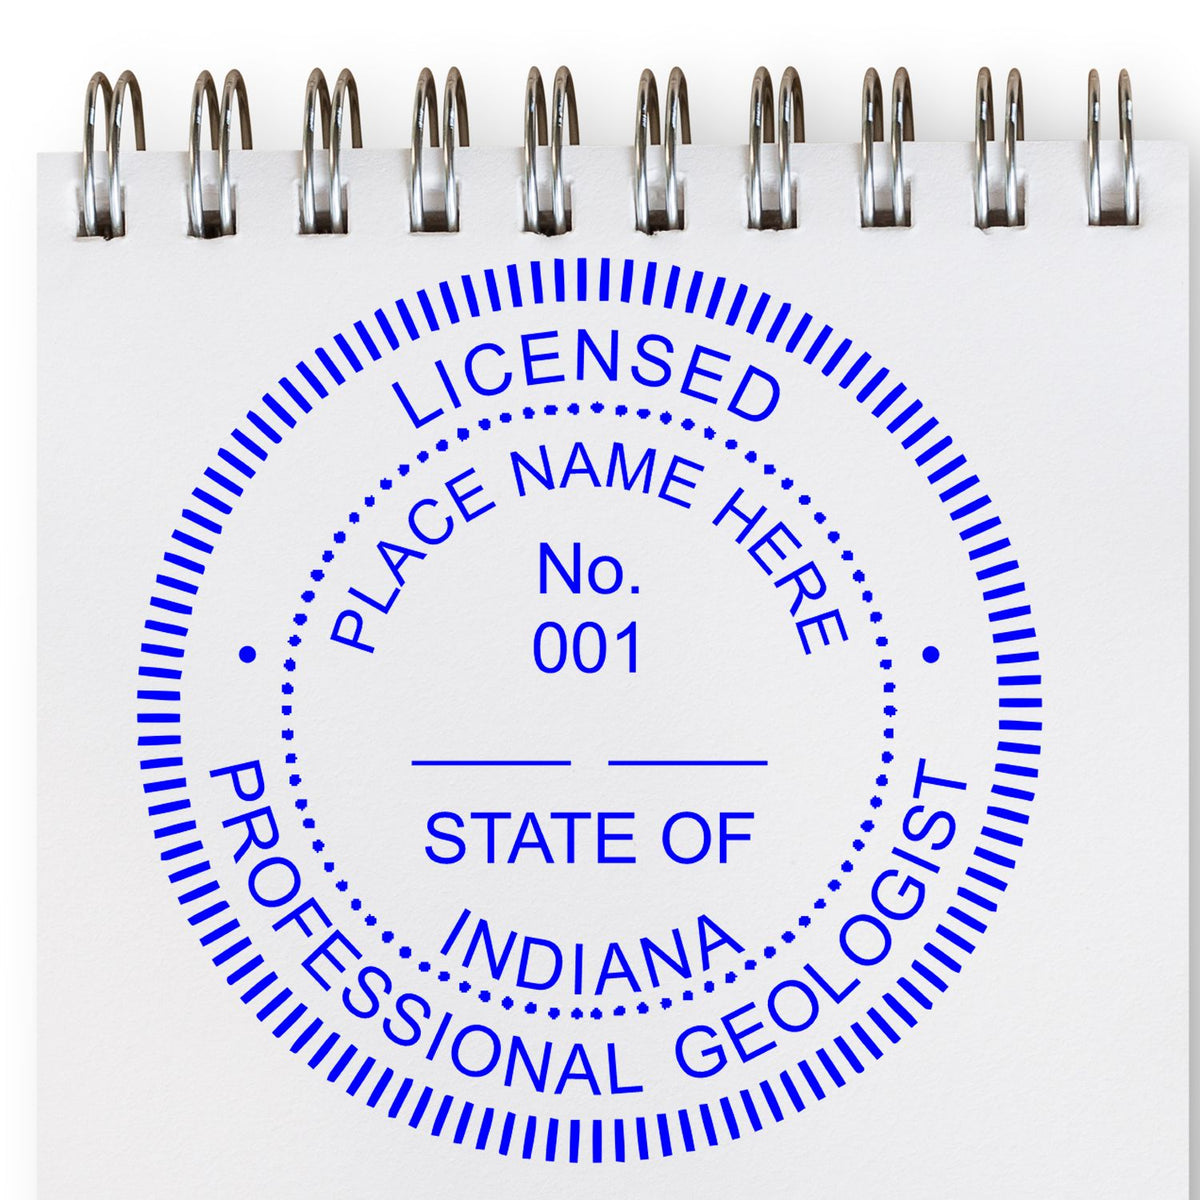 A lifestyle photo showing a stamped image of the Digital Indiana Geologist Stamp, Electronic Seal for Indiana Geologist on a piece of paper